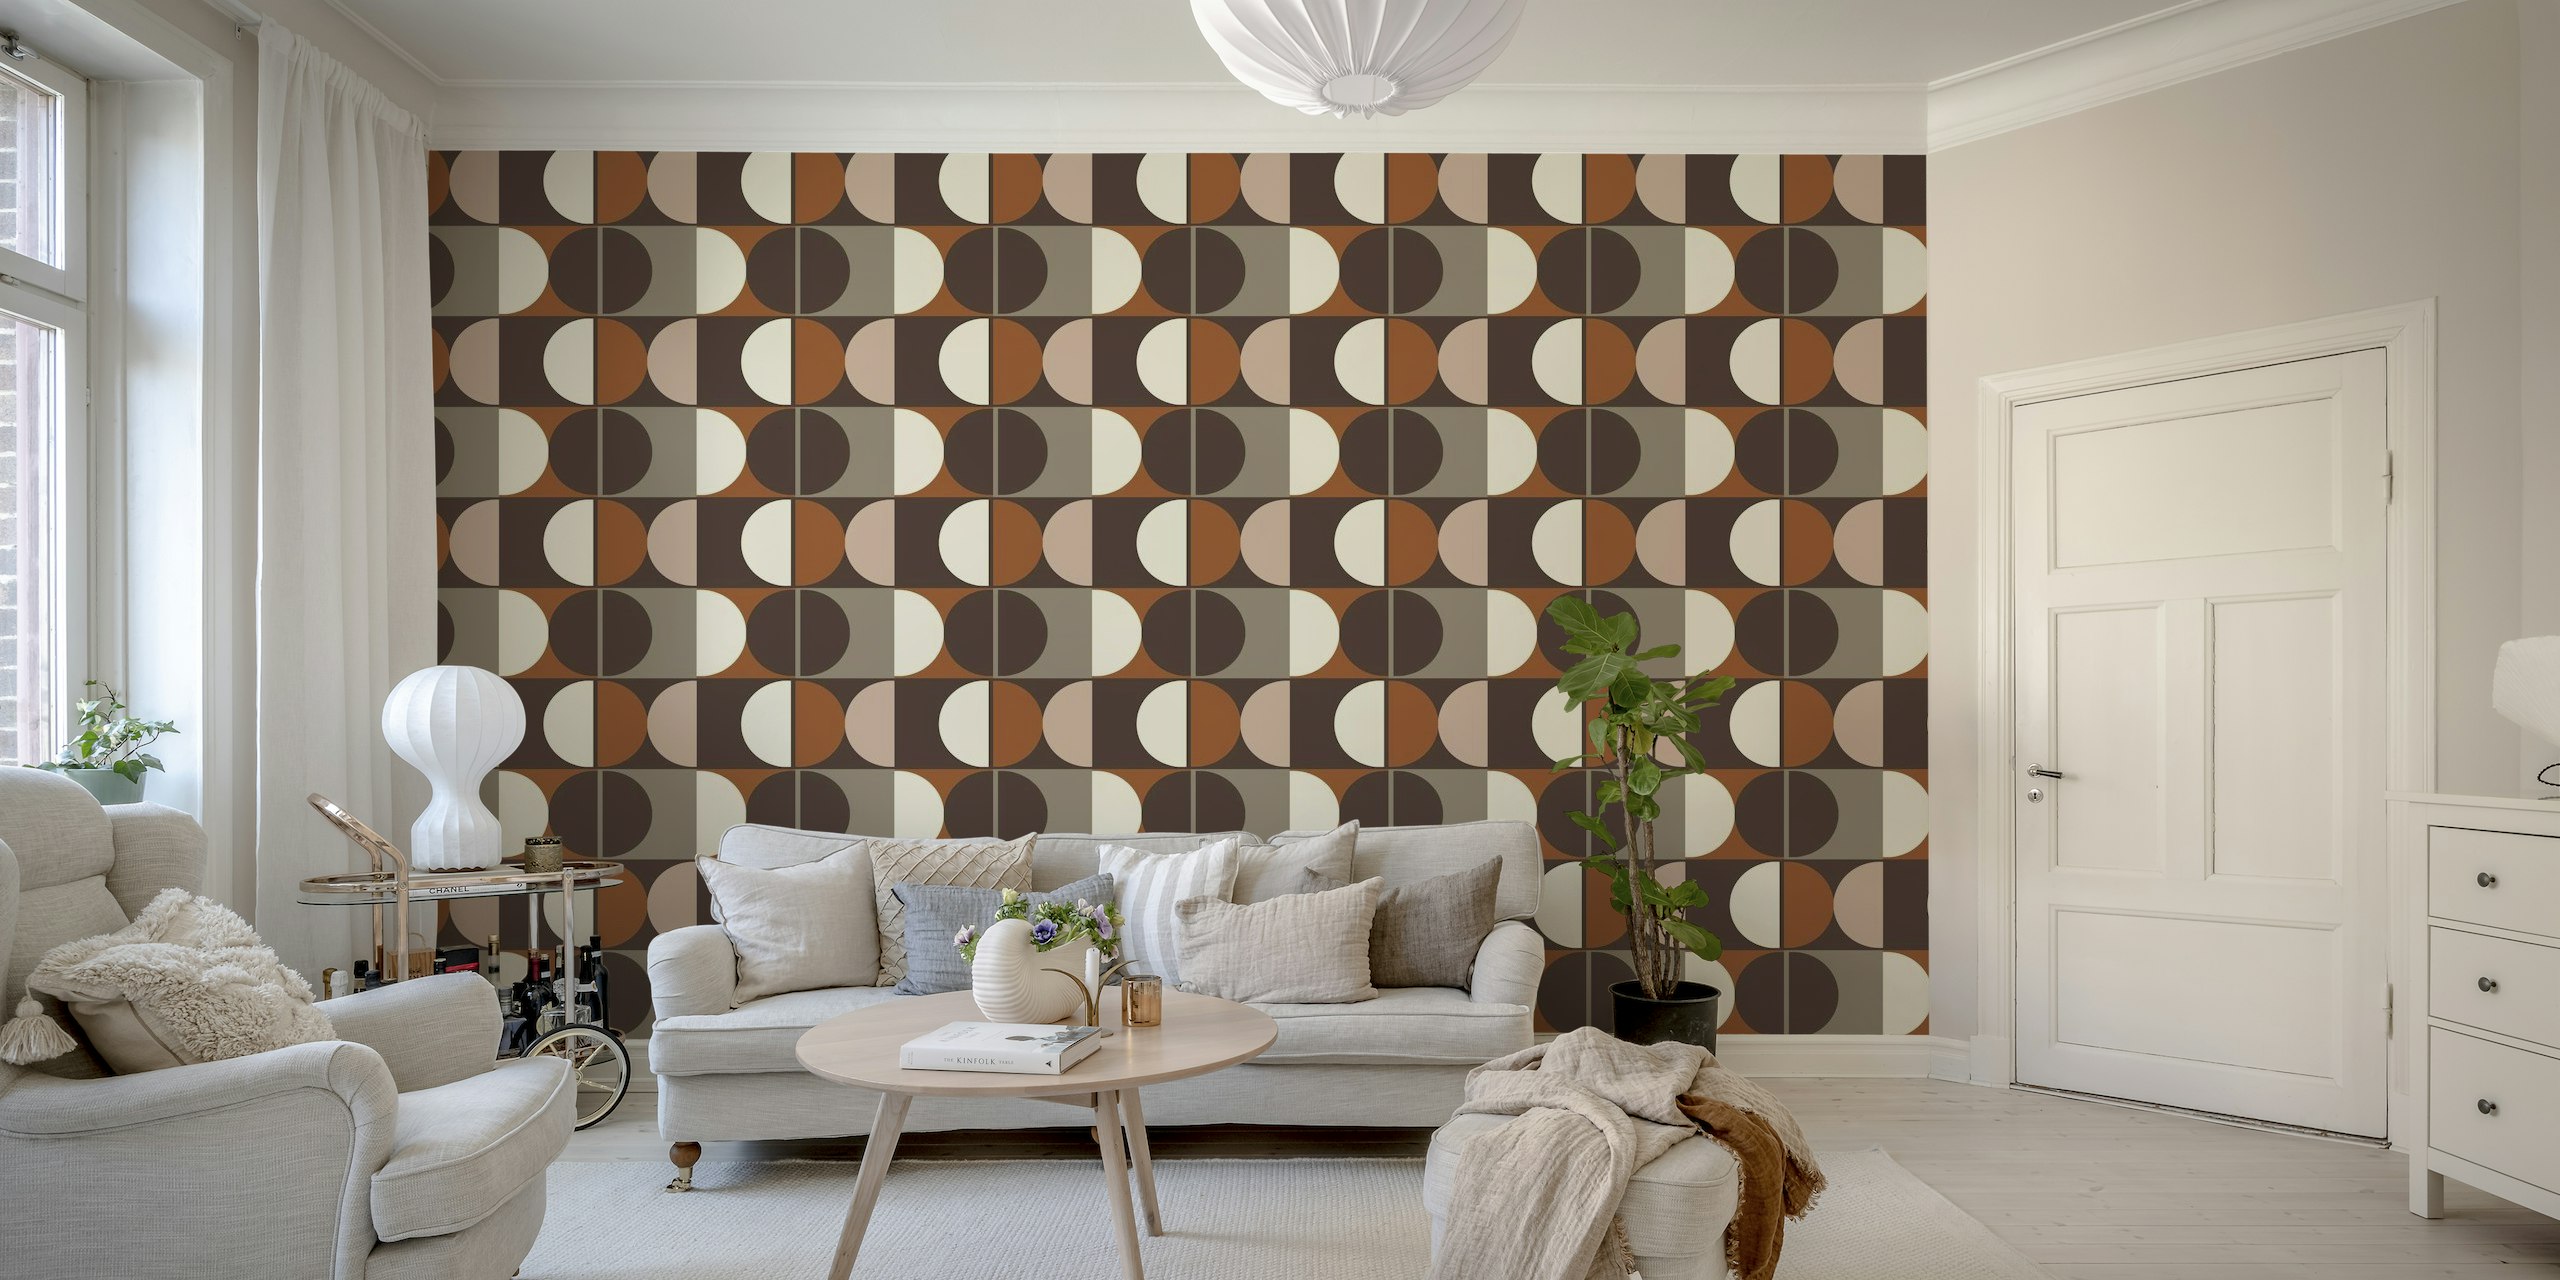 Abstract geometric wall mural in shades of bronze, white, and charcoal.